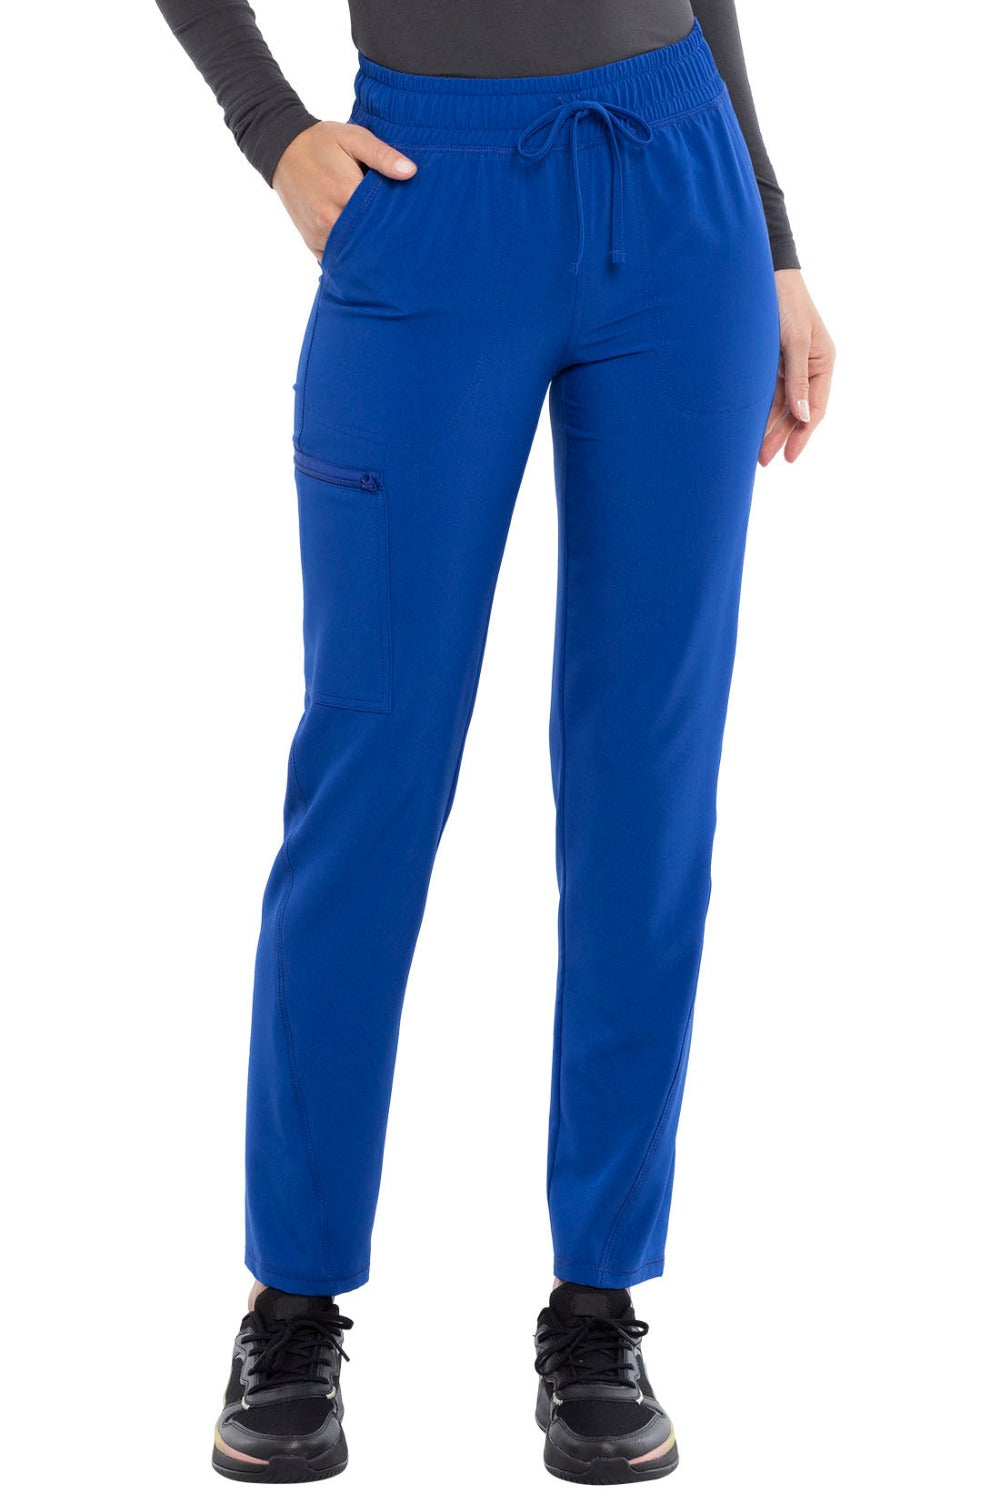 Cherokee Allura Scrub Pant Mid Rise Tapered Leg Drawstring in Galaxy Blue at Parker's Clothing and Shoes.